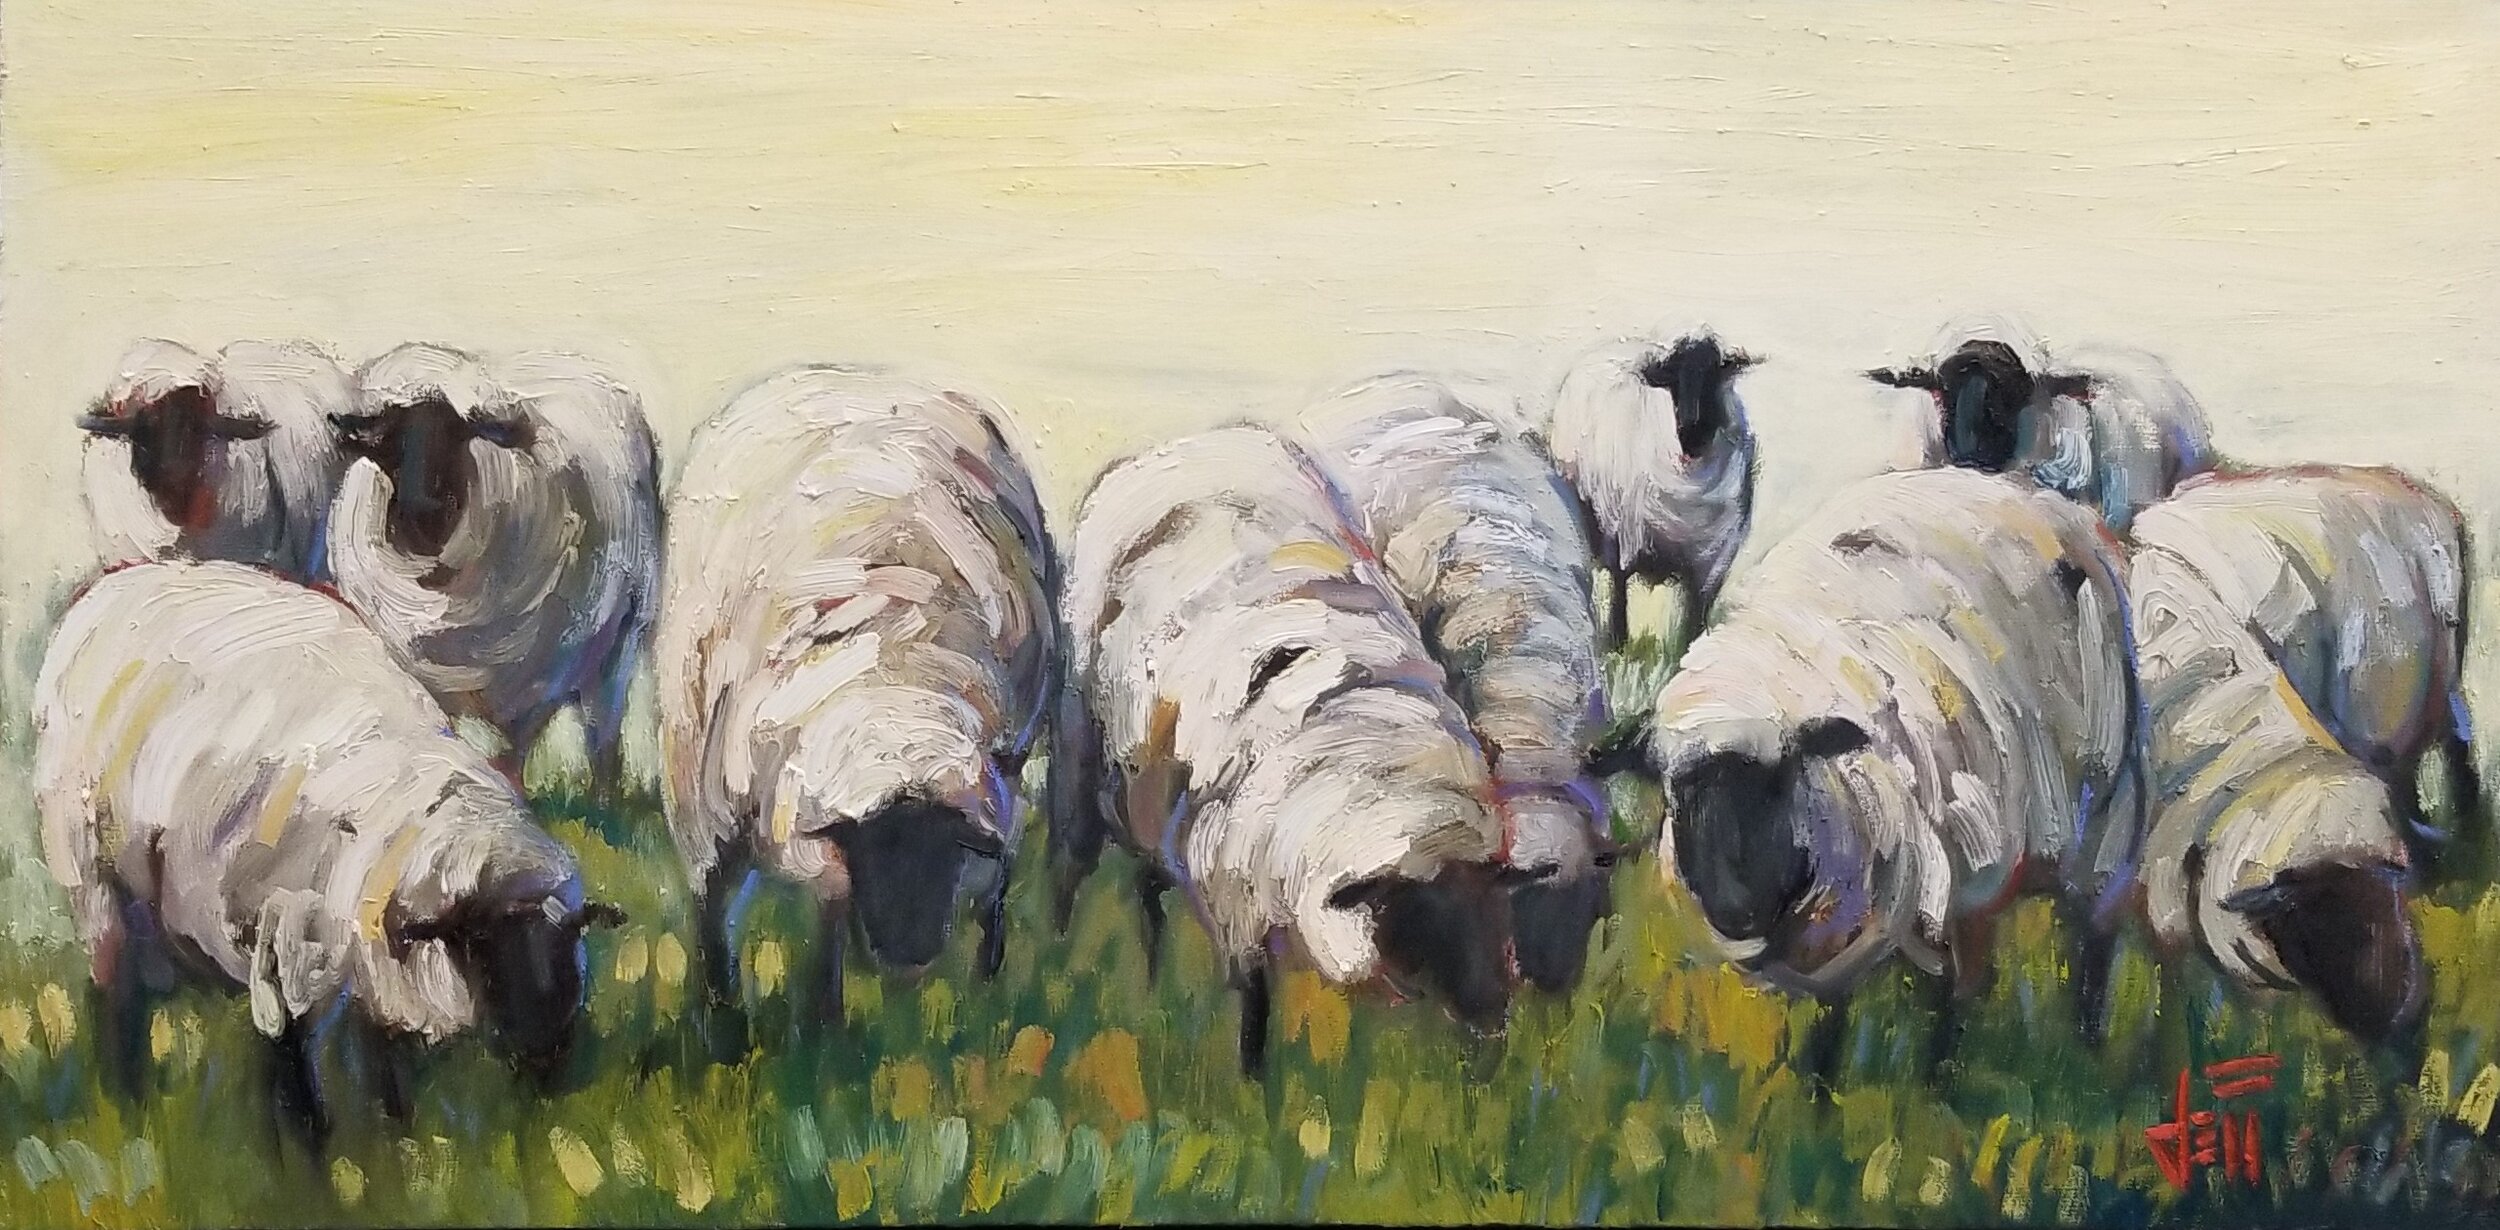  Wool Blend-oil on canvas 24” x 48”  Boutin Gallery 